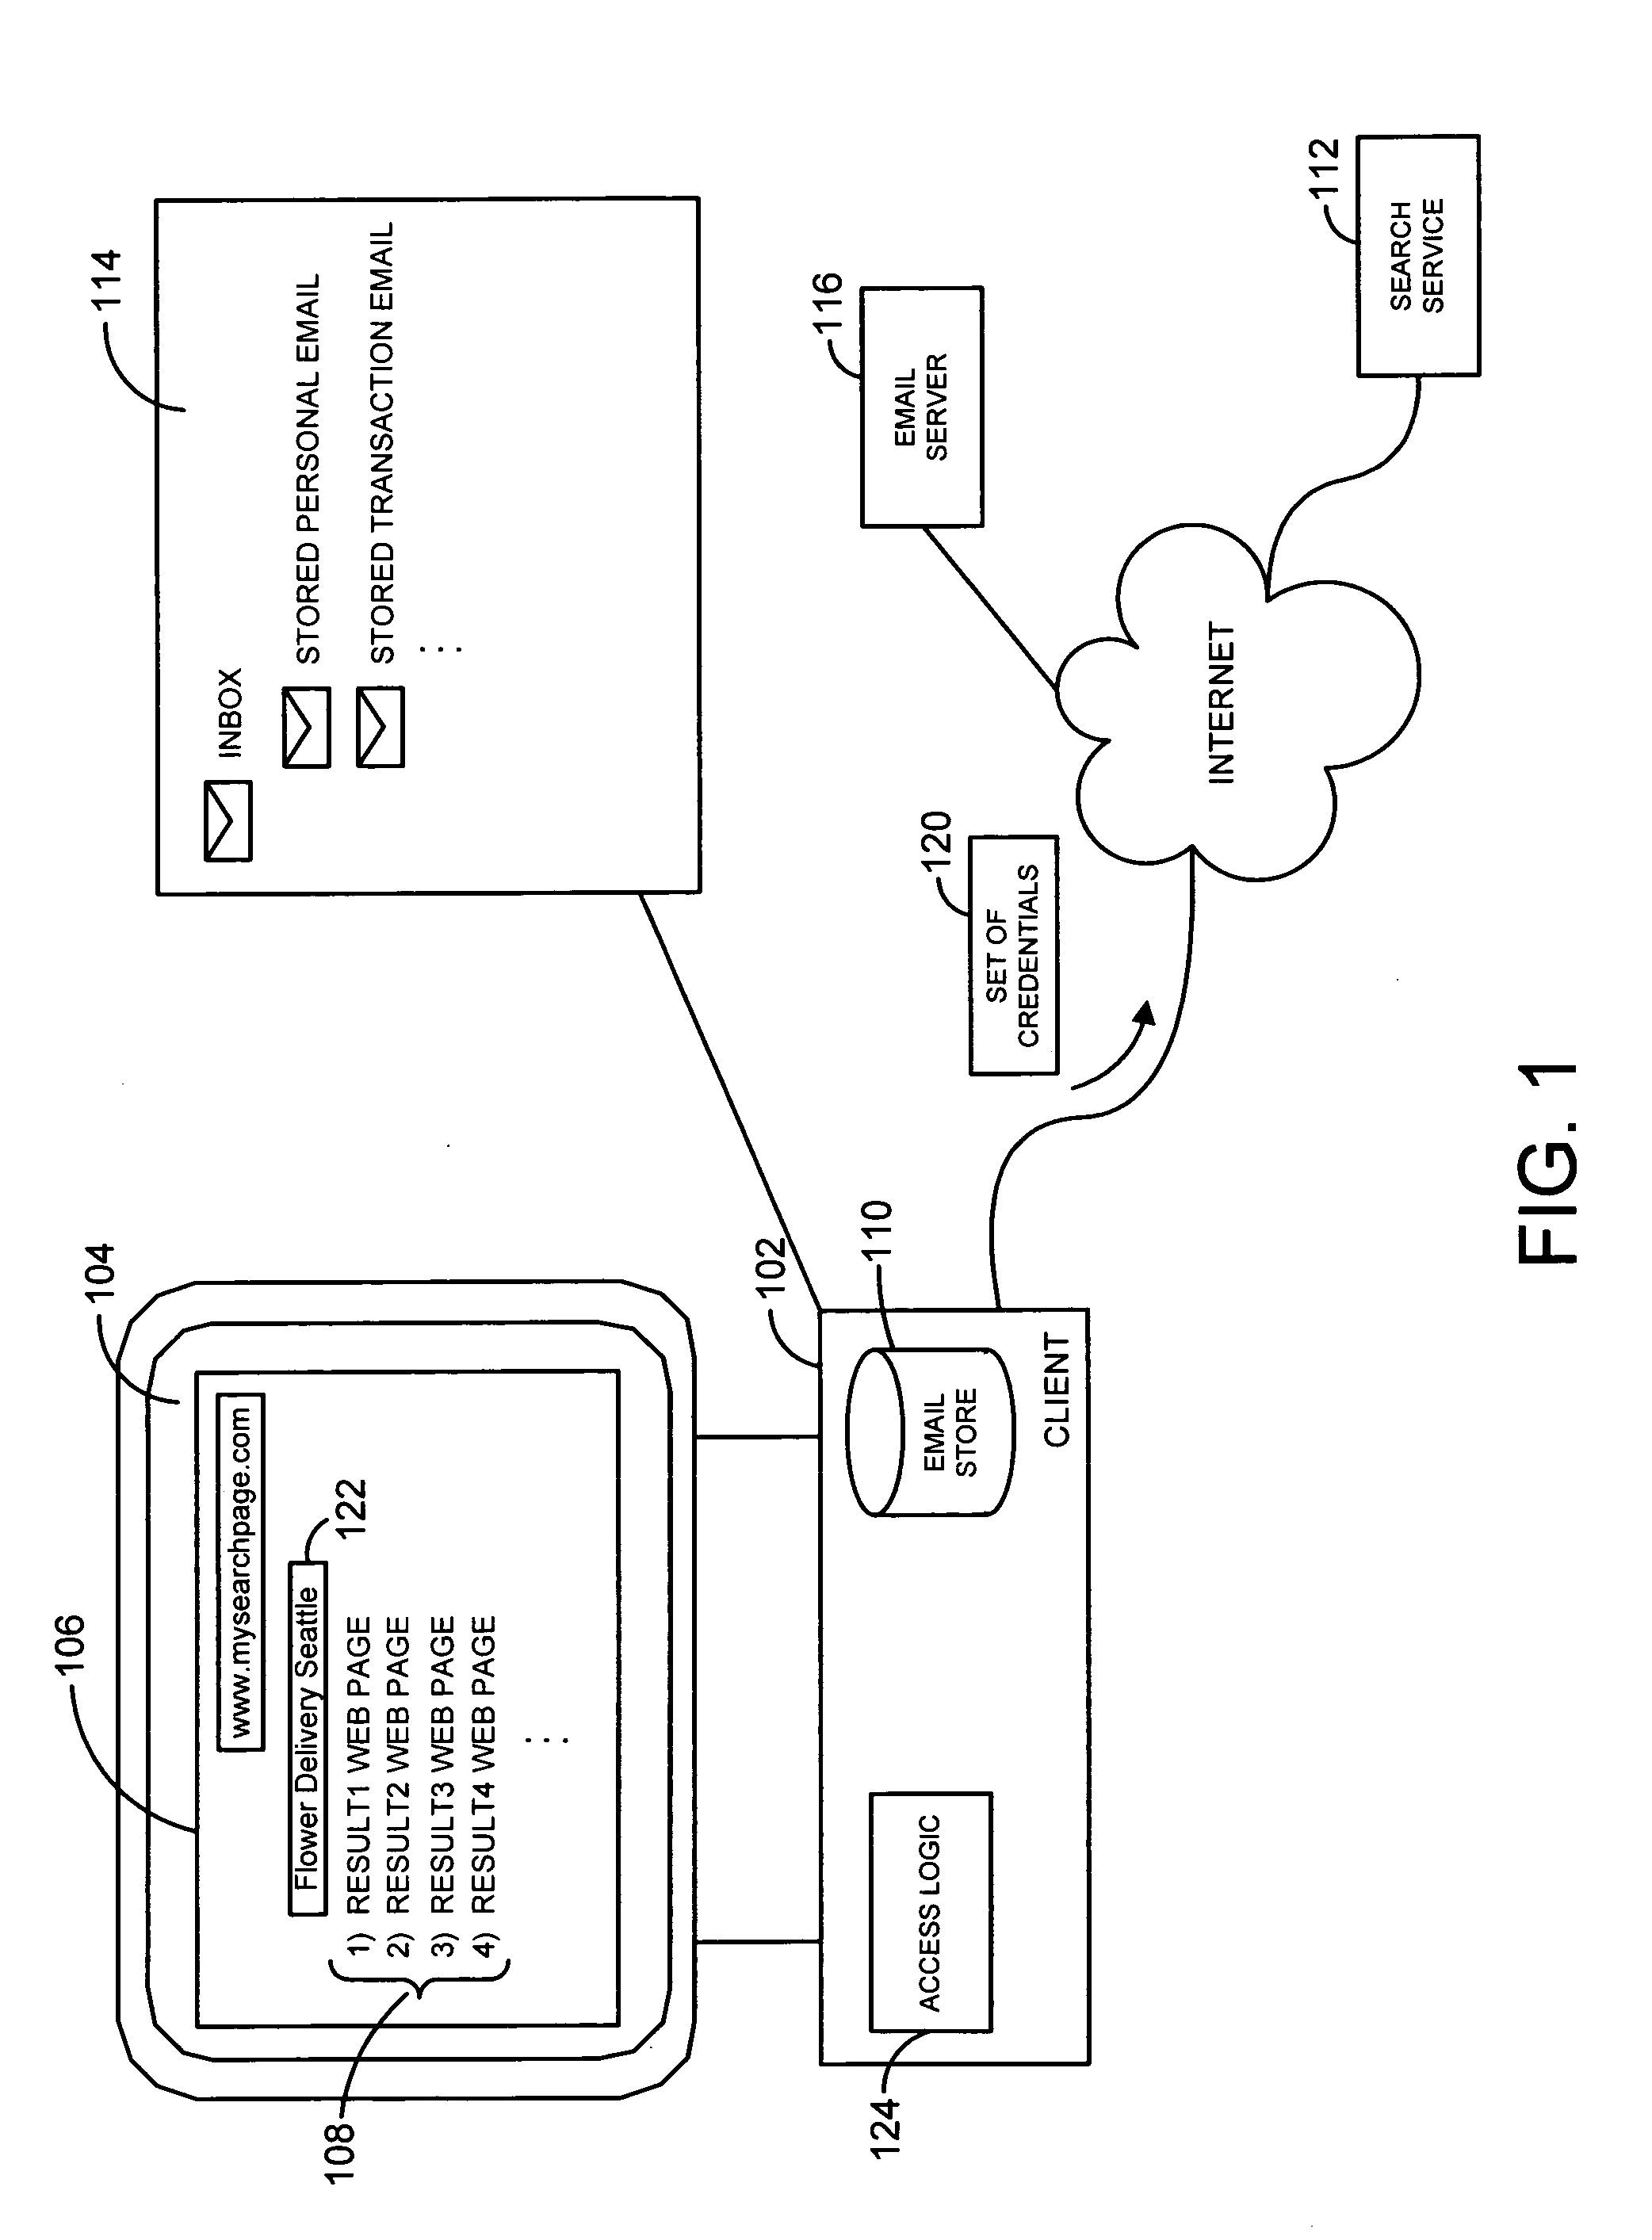 System and method for simultaneous search service and email search